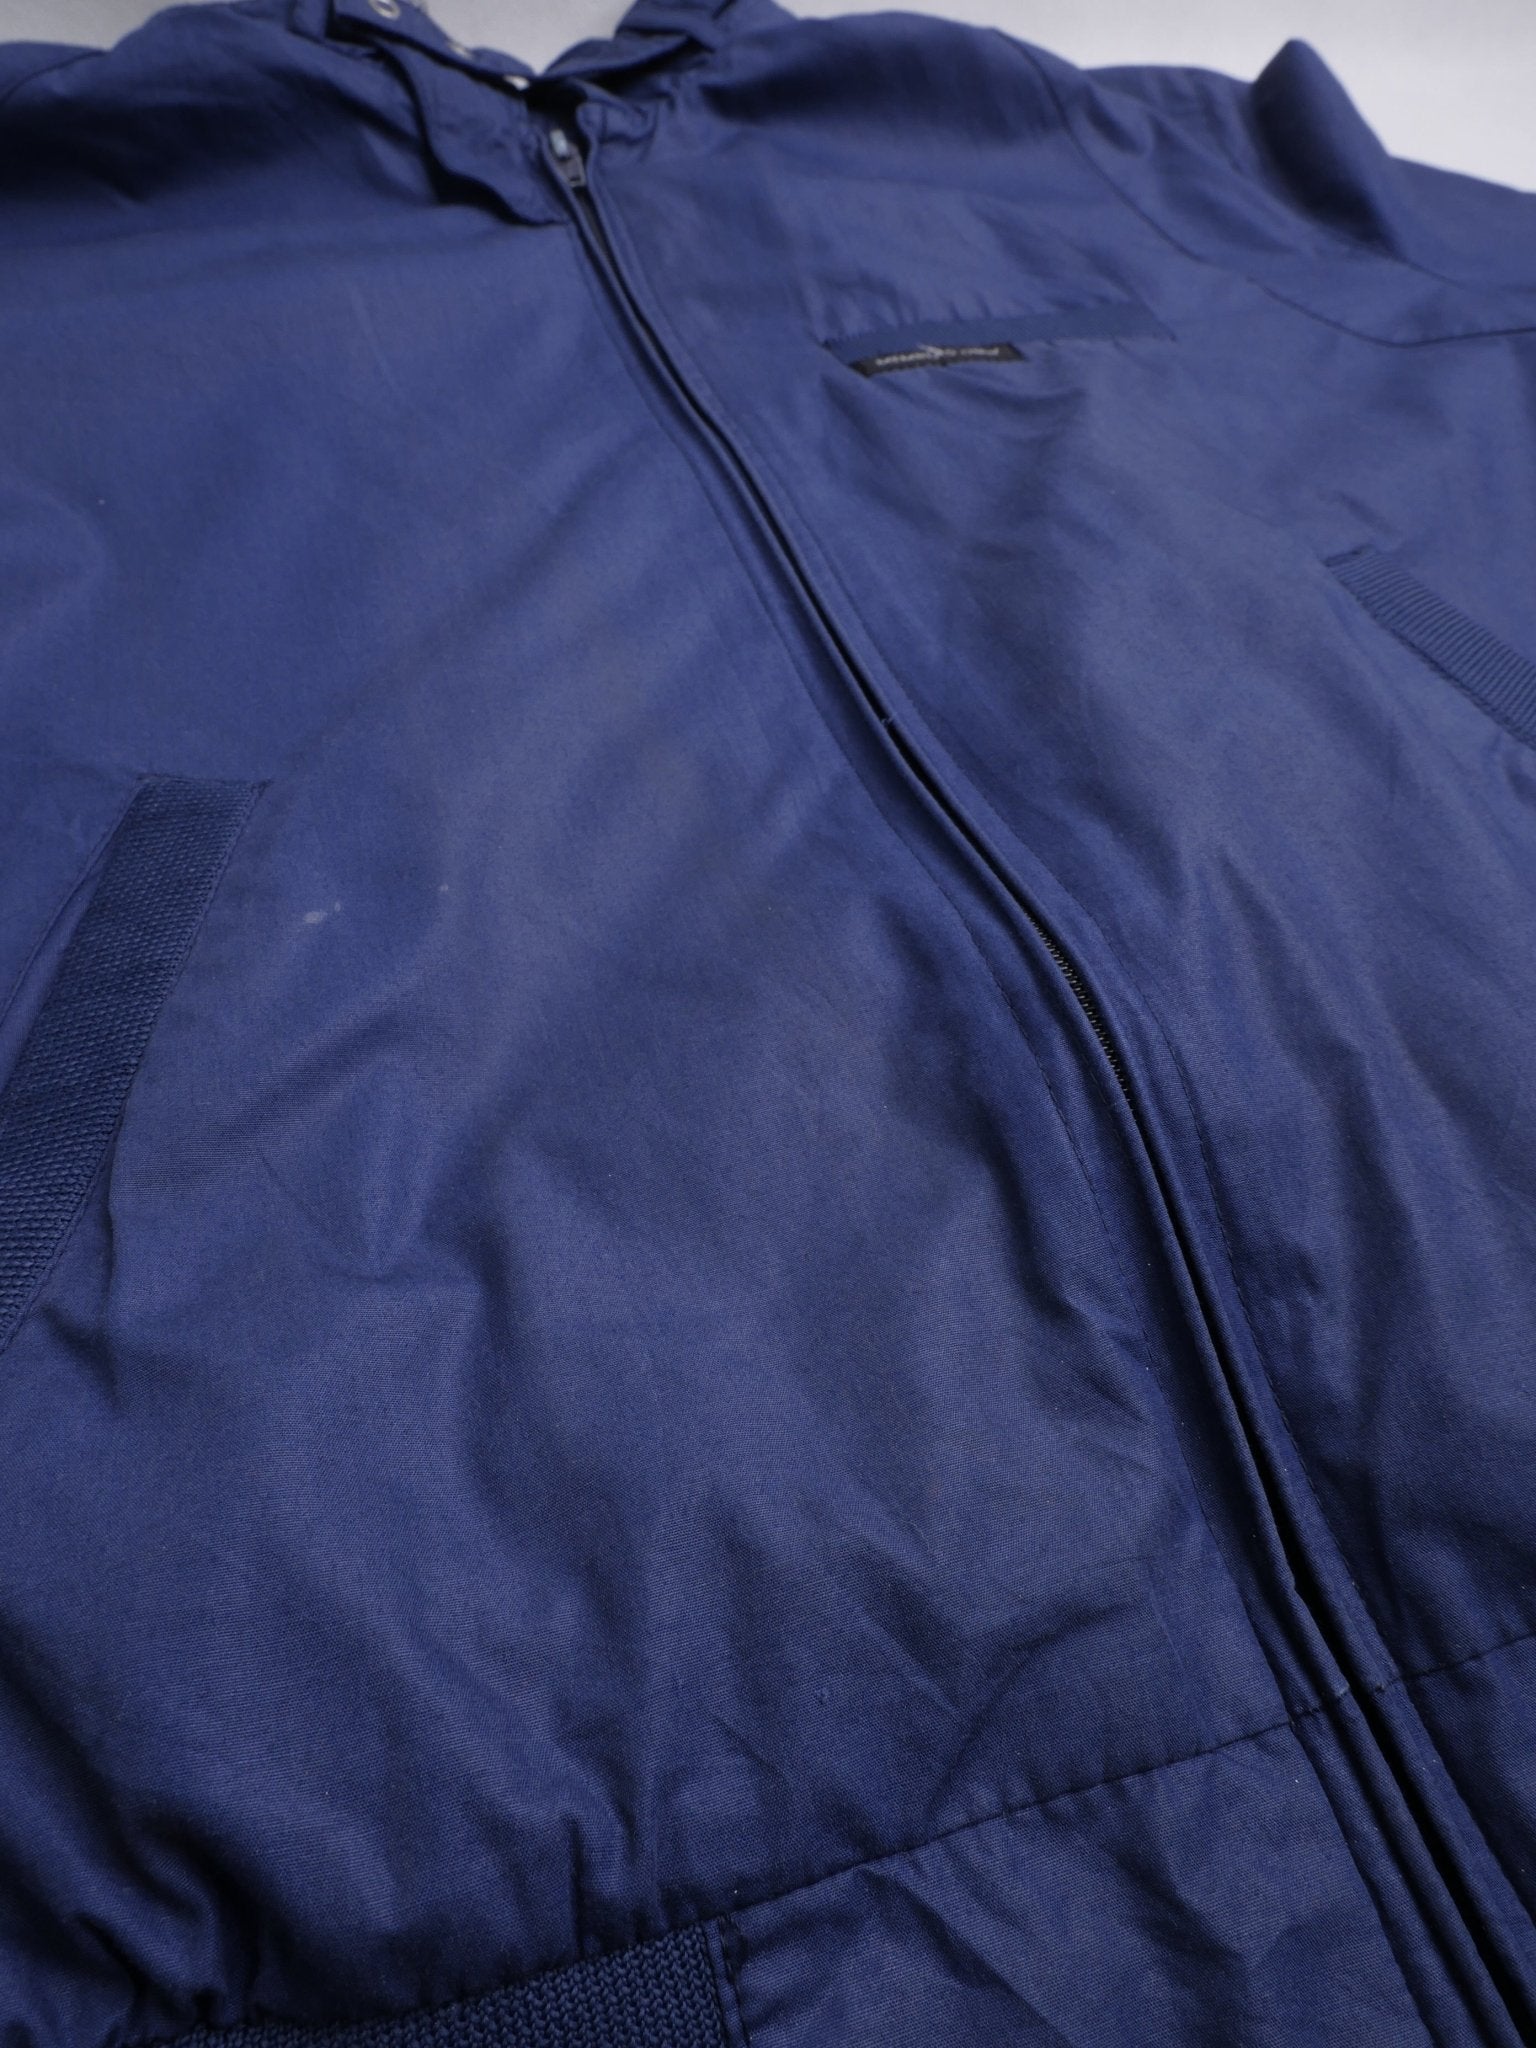 Members Only Patch blue Jacket - Peeces